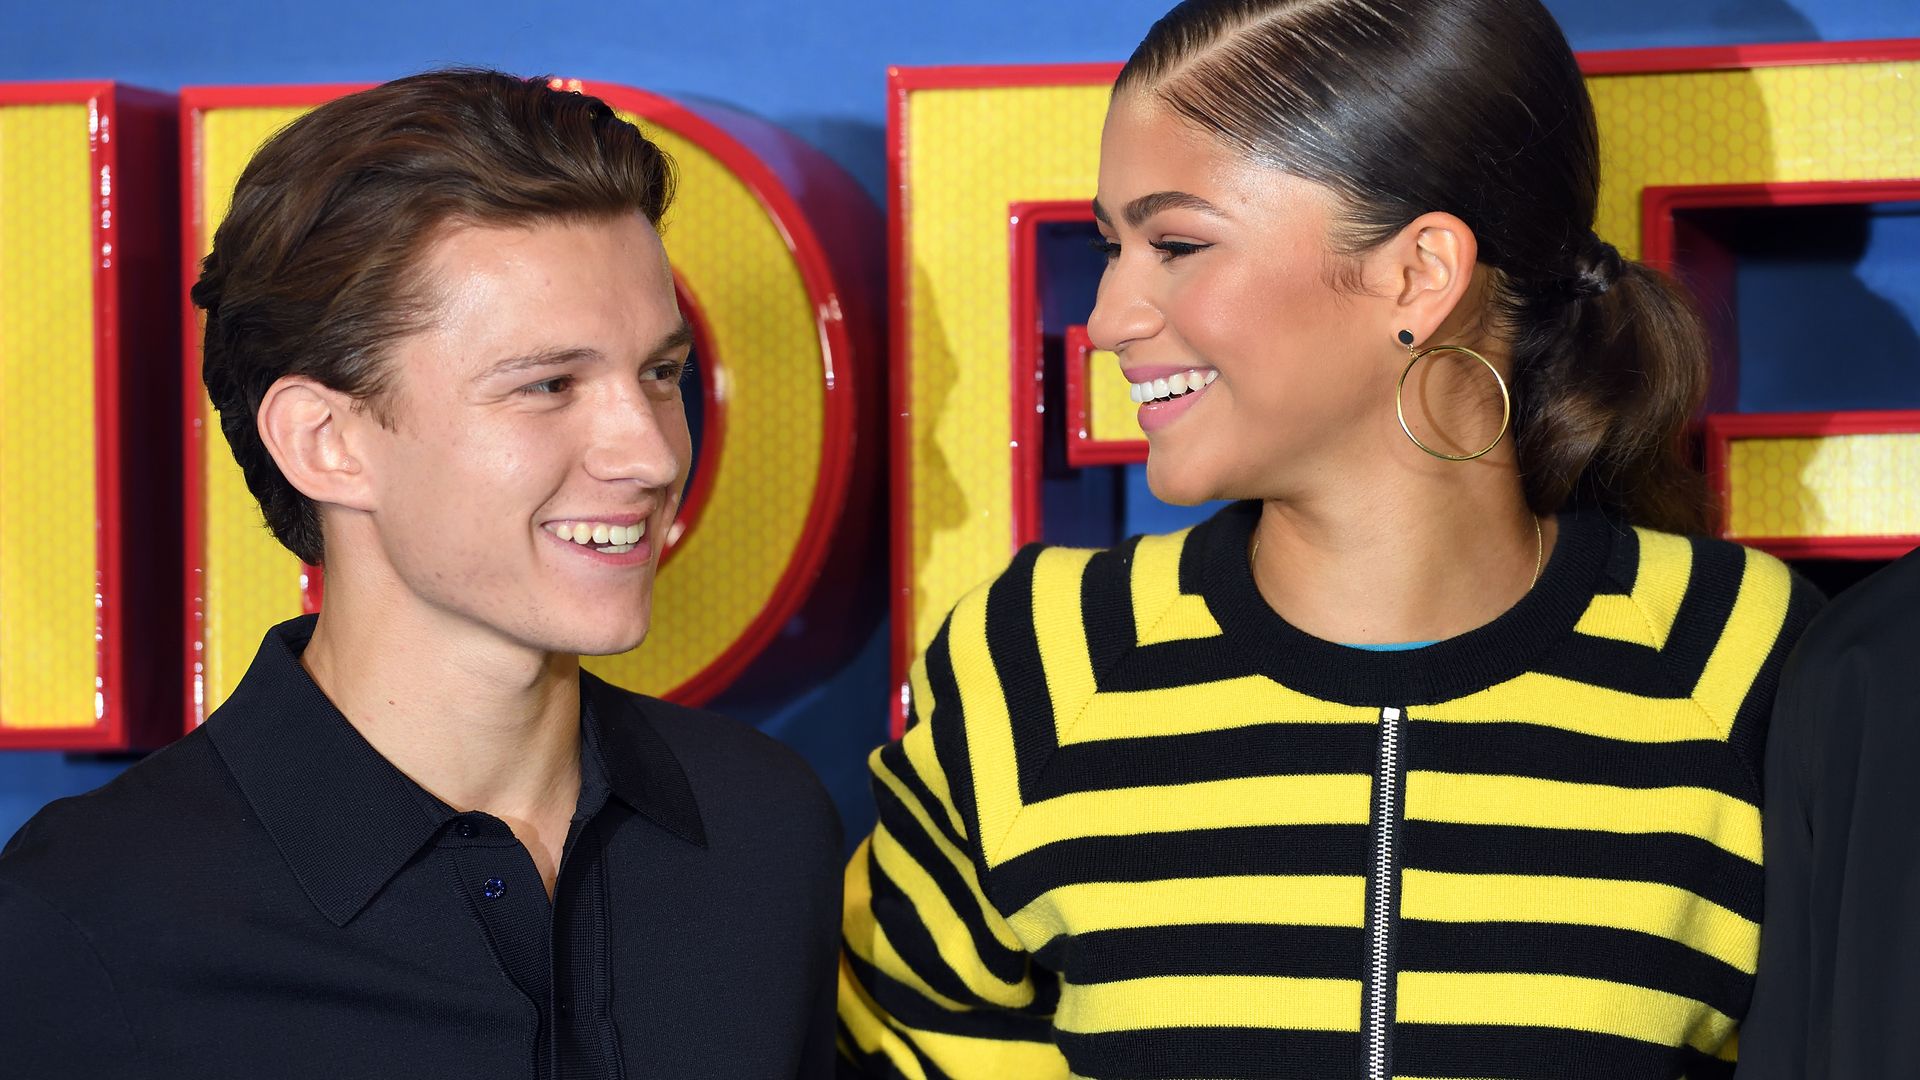 Zendaya and Tom in June 2017 laughing and smiling at each other